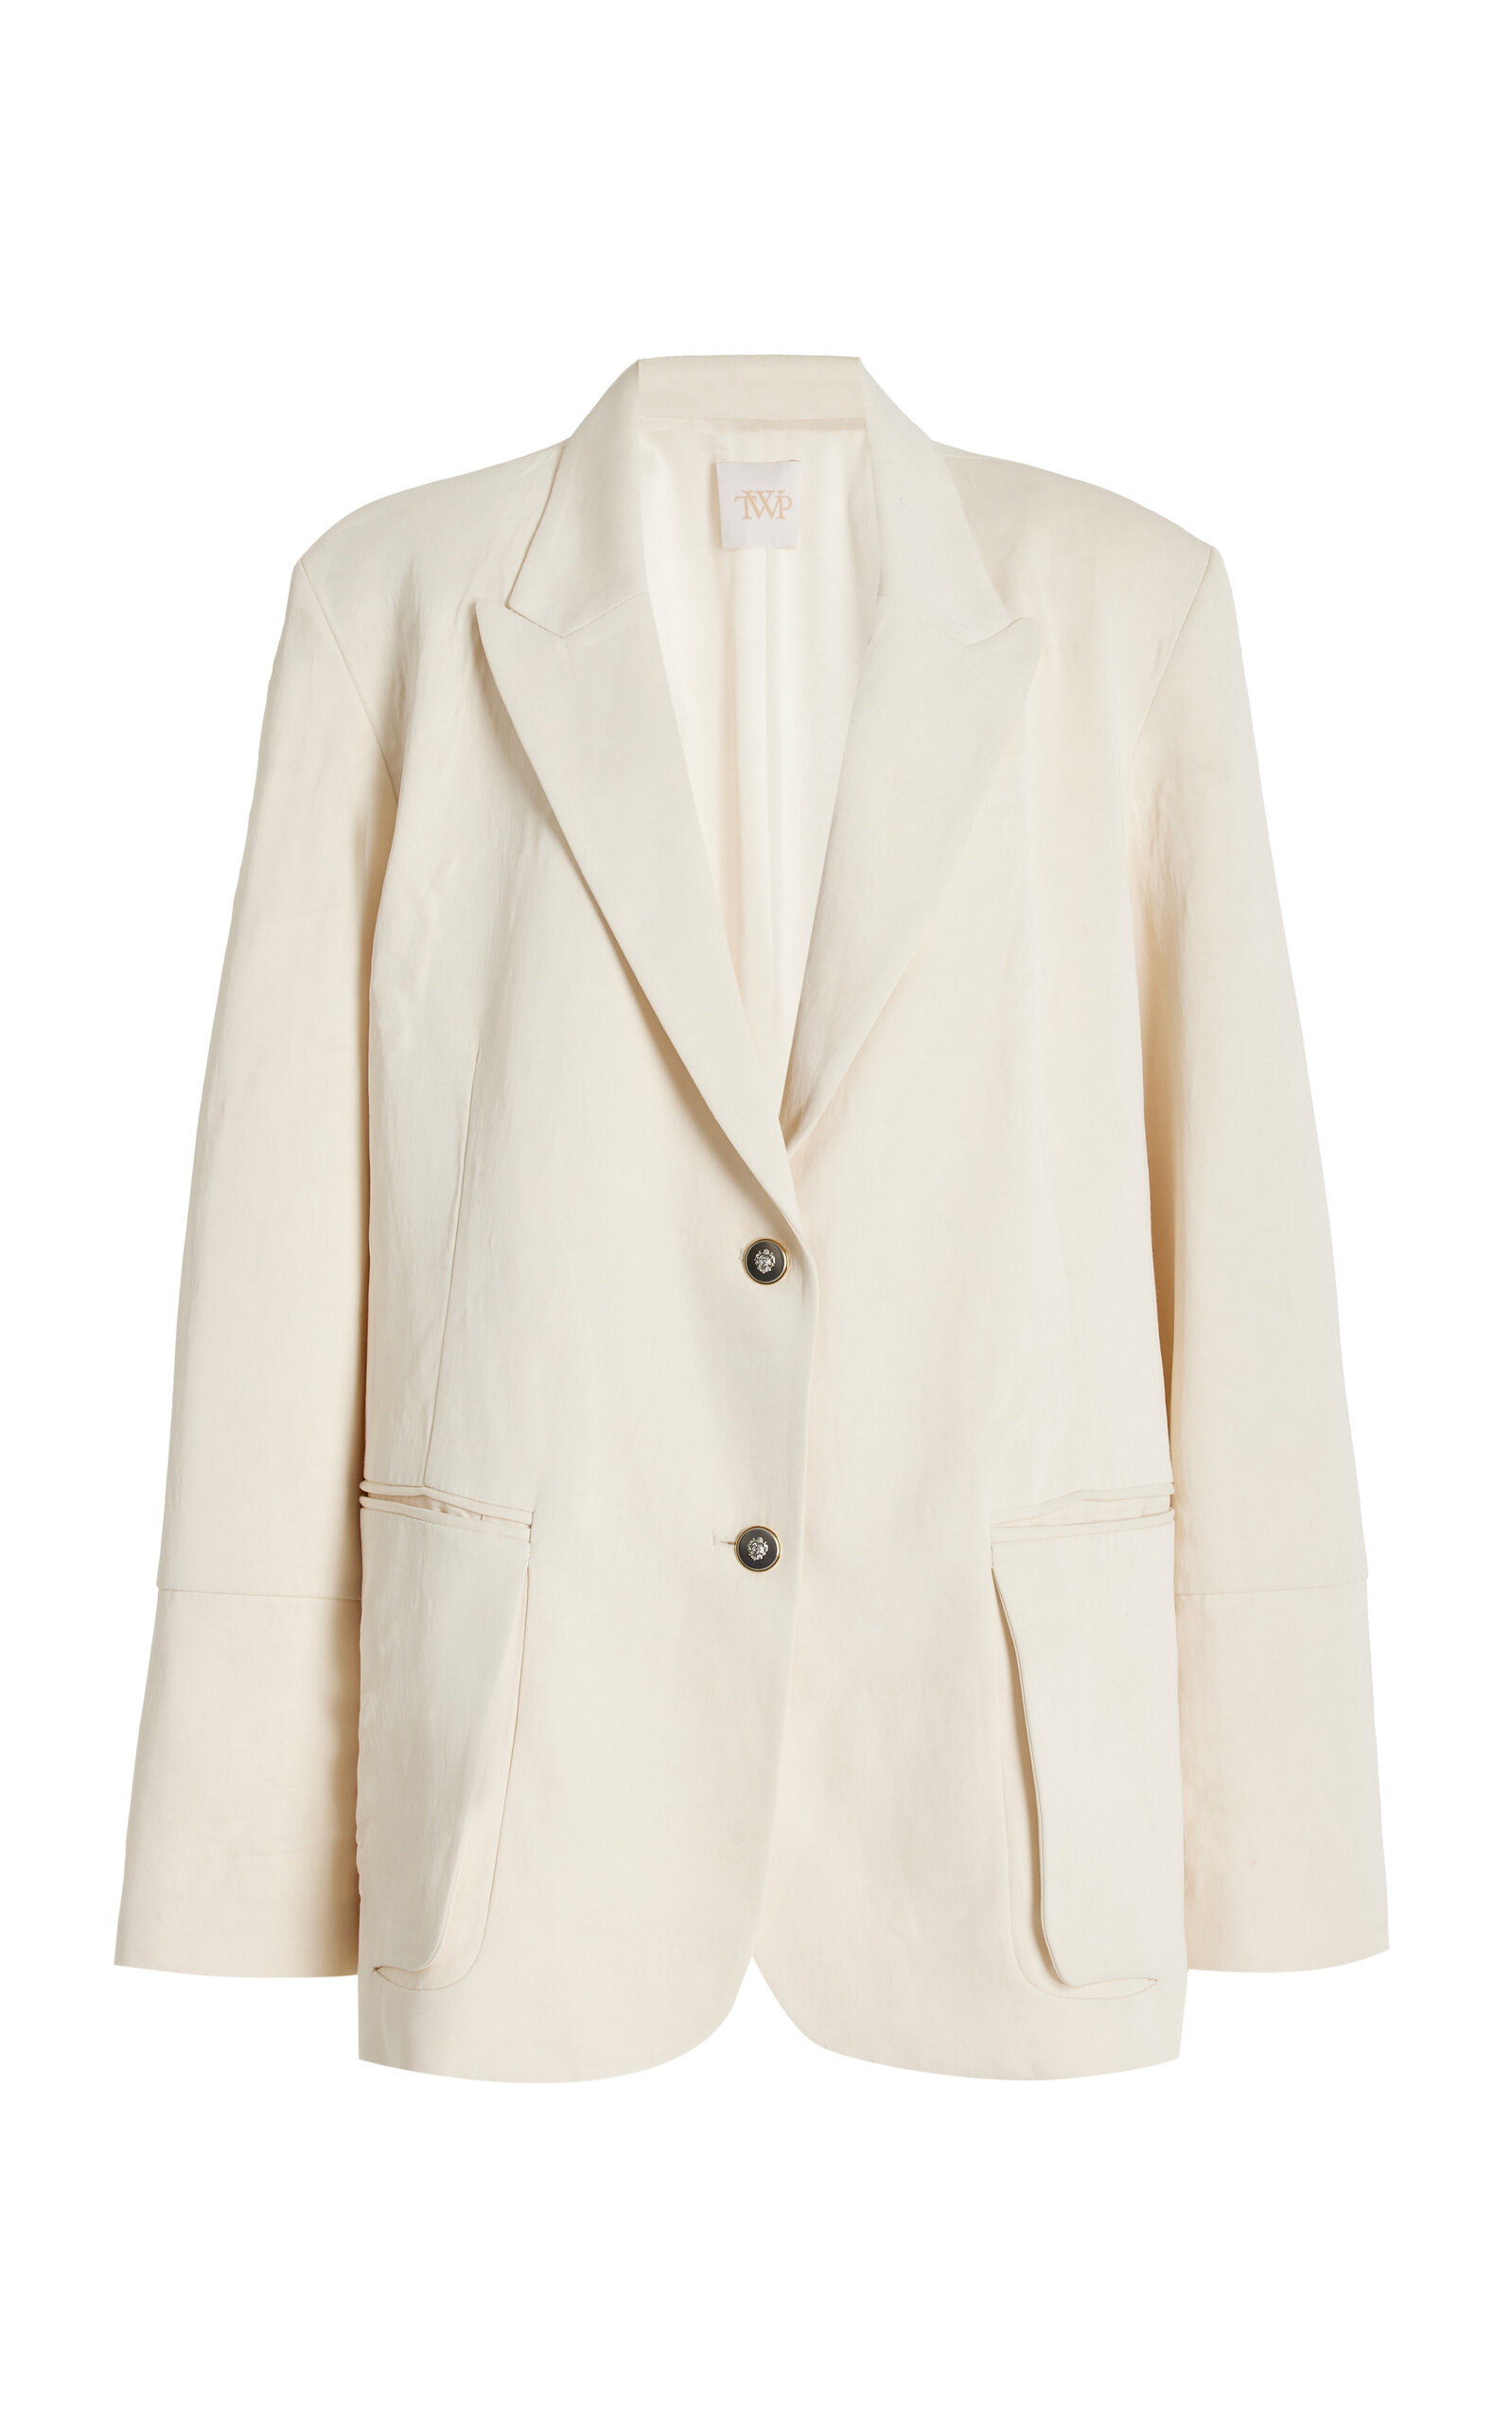 Shop Twp Exclusive Sweet Pea Oversized Blazer In Off-white